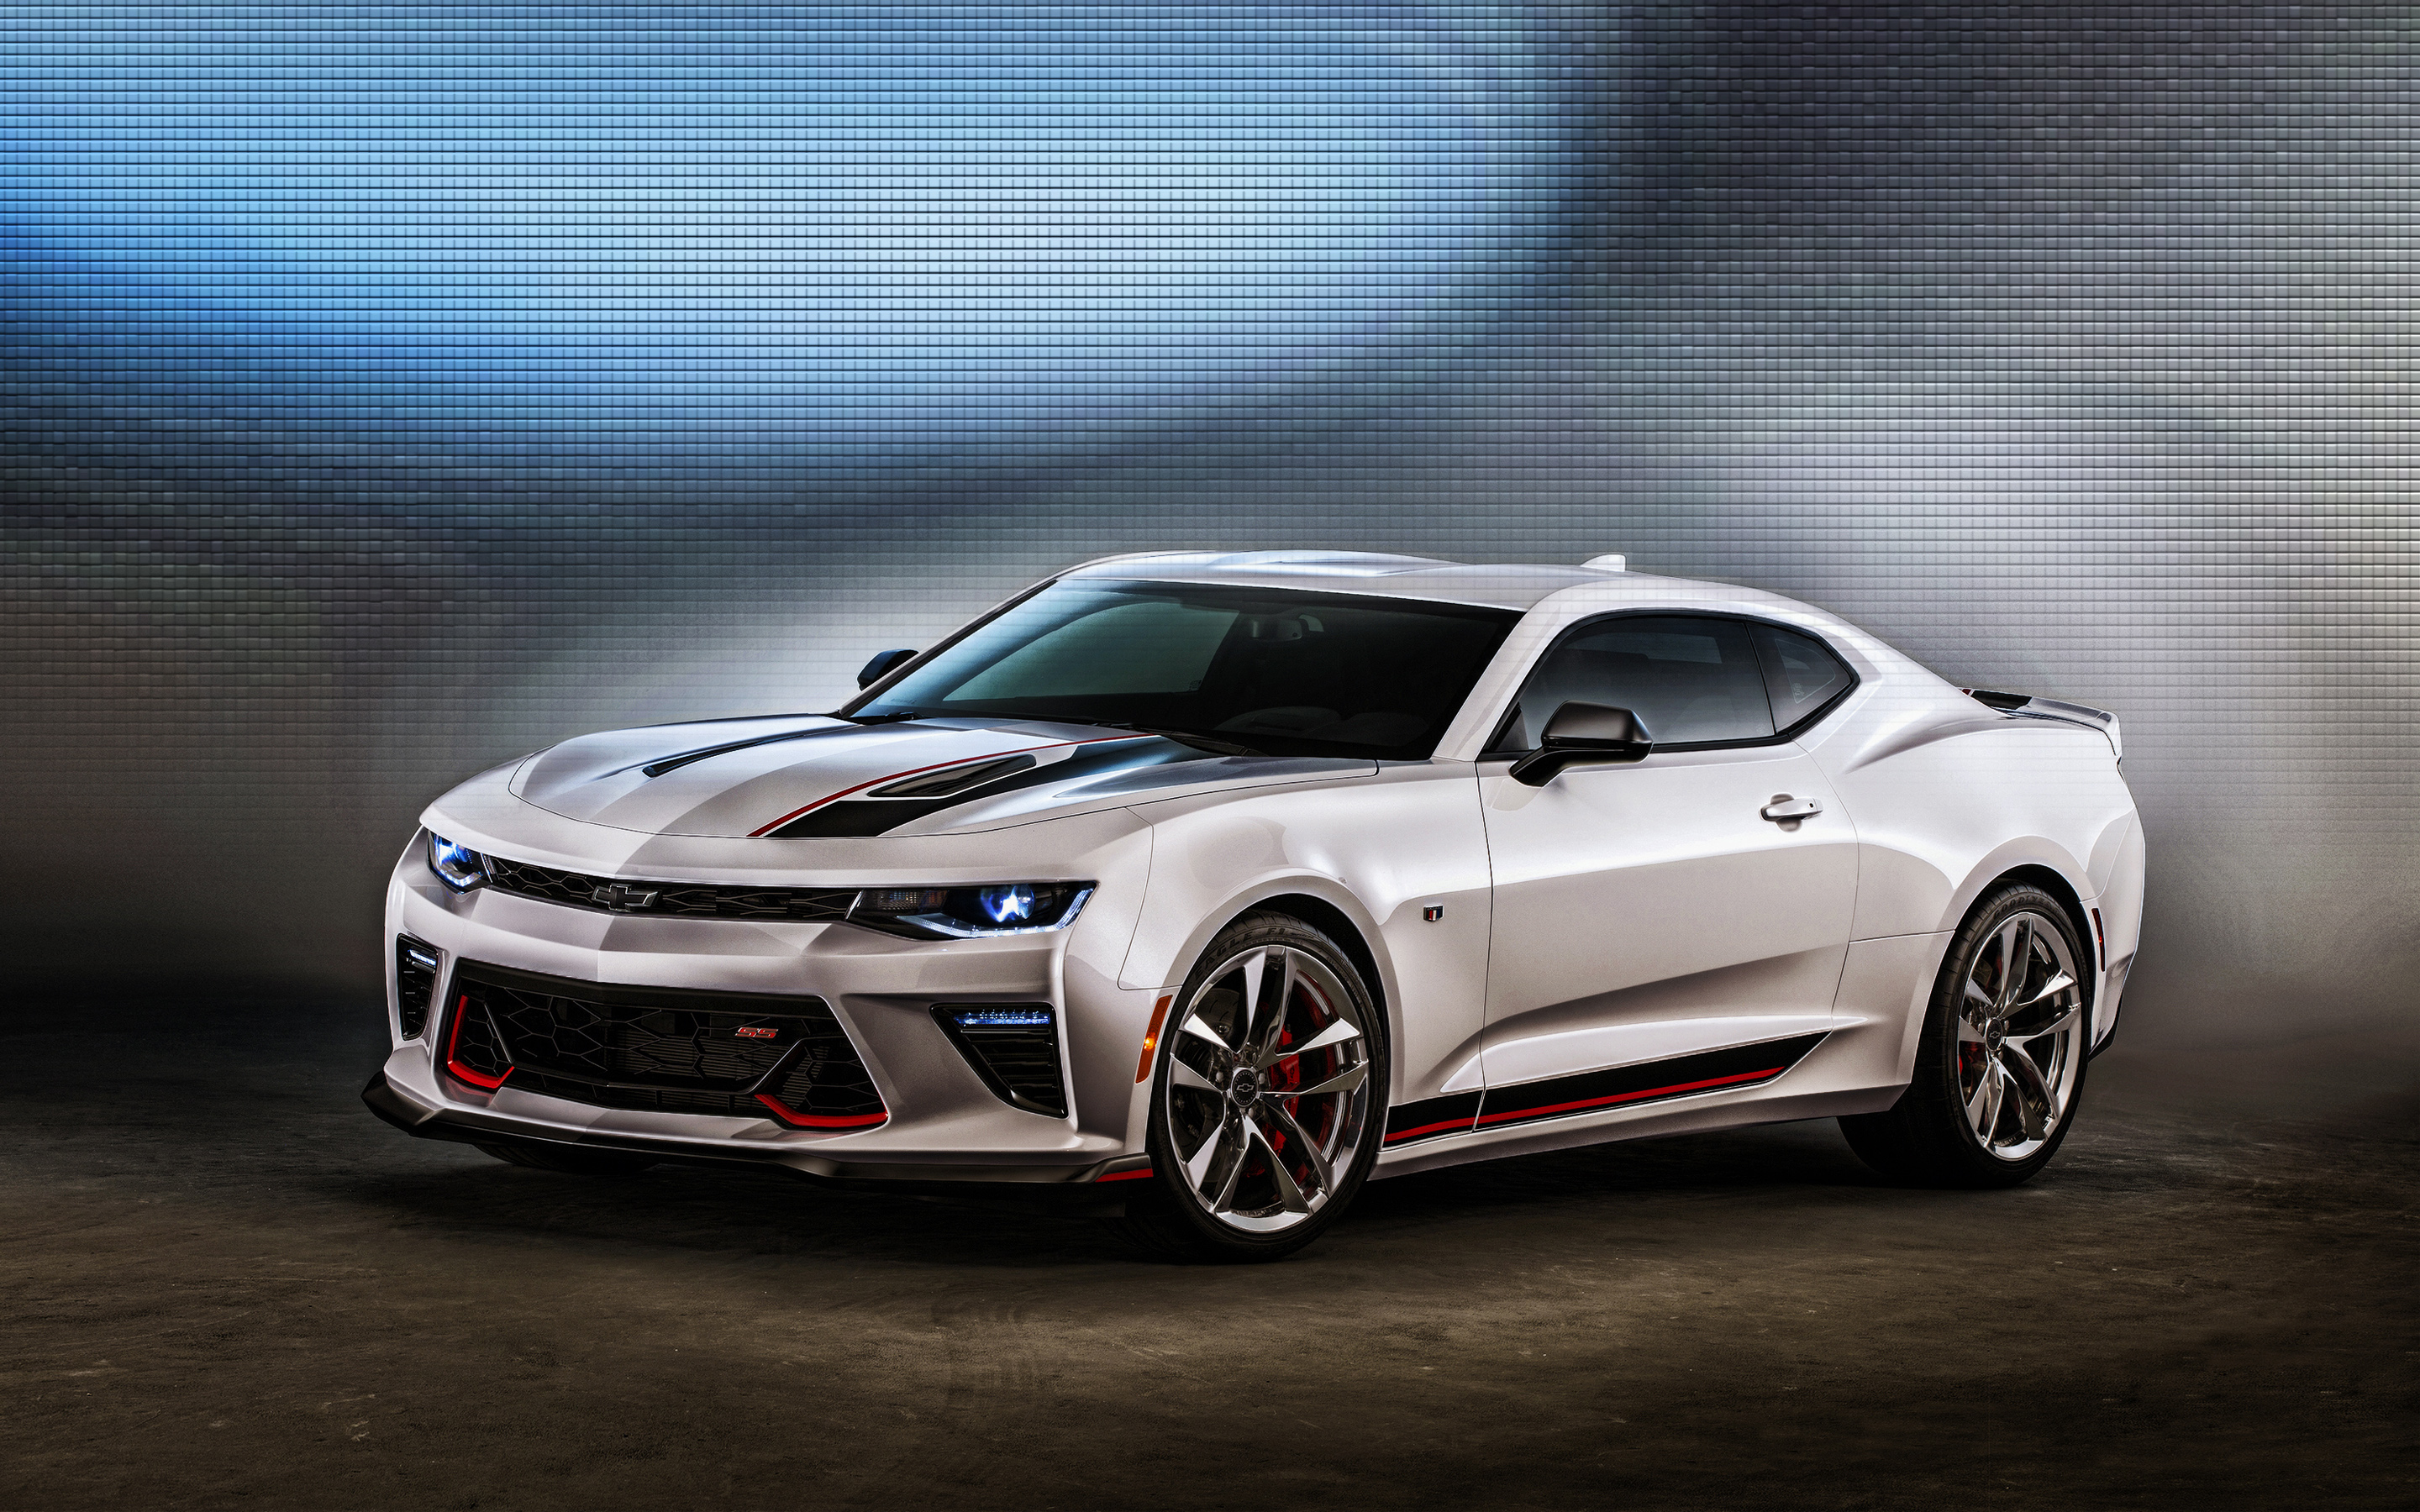 2016 Chevrolet Camaro SS Concept Wallpapers HD Wallpapers 2880x1800